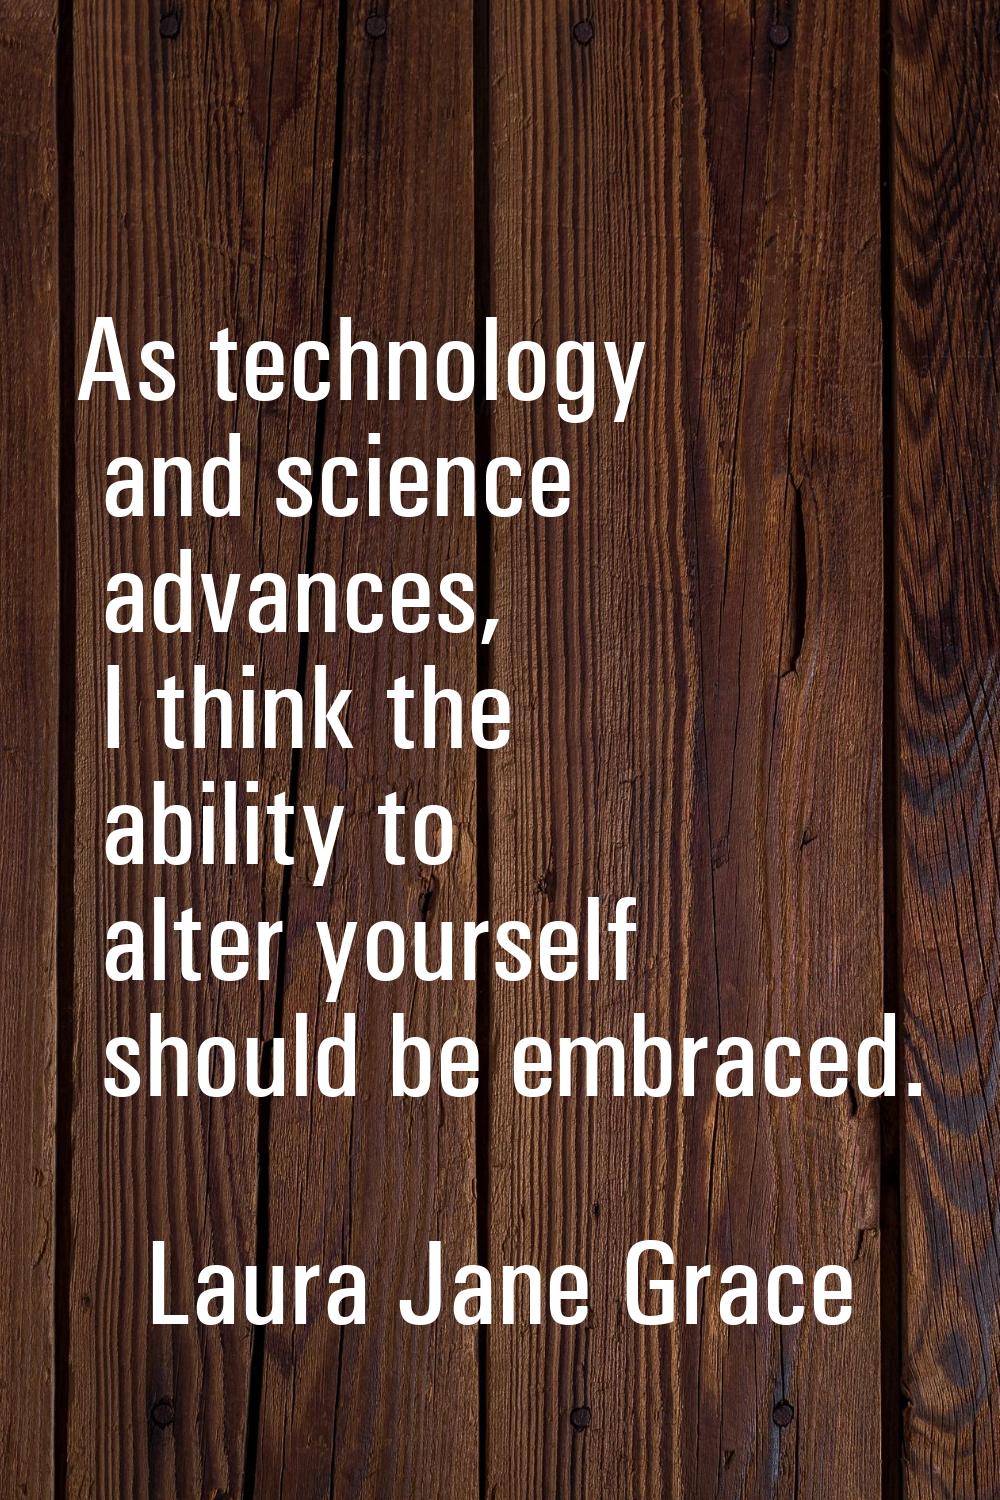 As technology and science advances, I think the ability to alter yourself should be embraced.